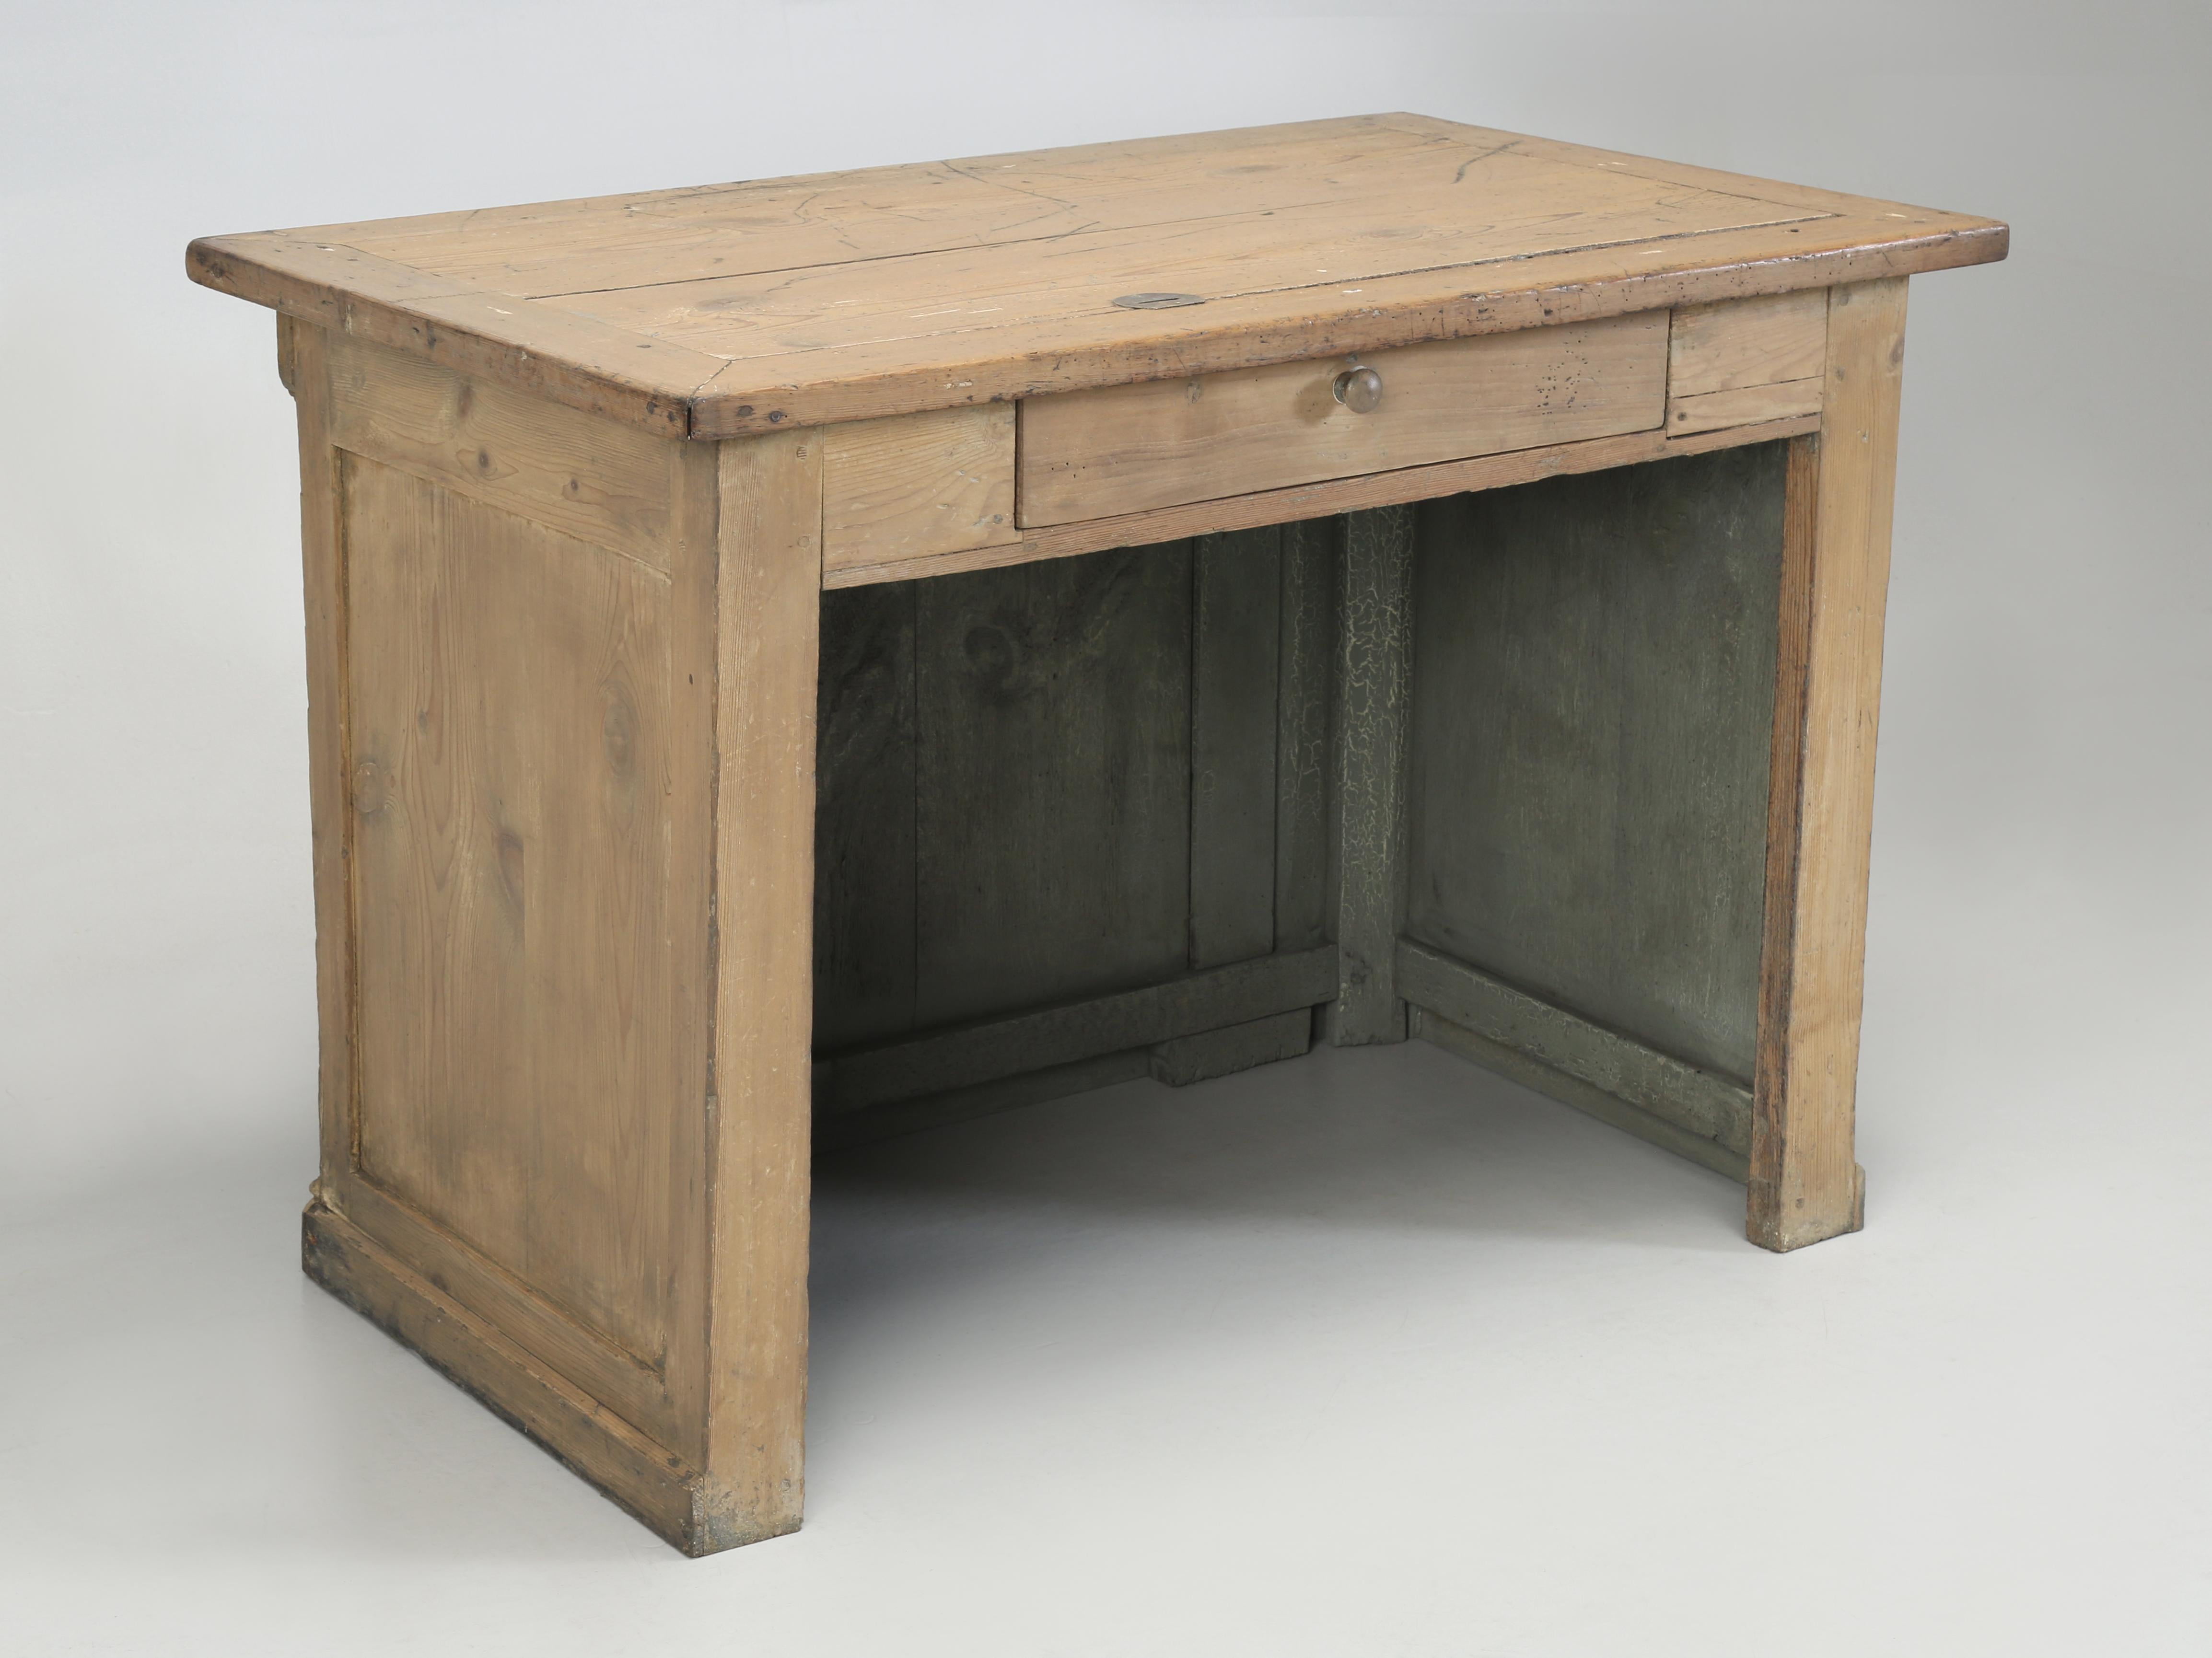 Antique French Store Counter that would make for a wonderful small Kitchen Island and yes, we can build shelves on the inside as you wish. The paint has an incredible natural patina and is original to the Kitchen Island, or Craft Room Cabinet? We